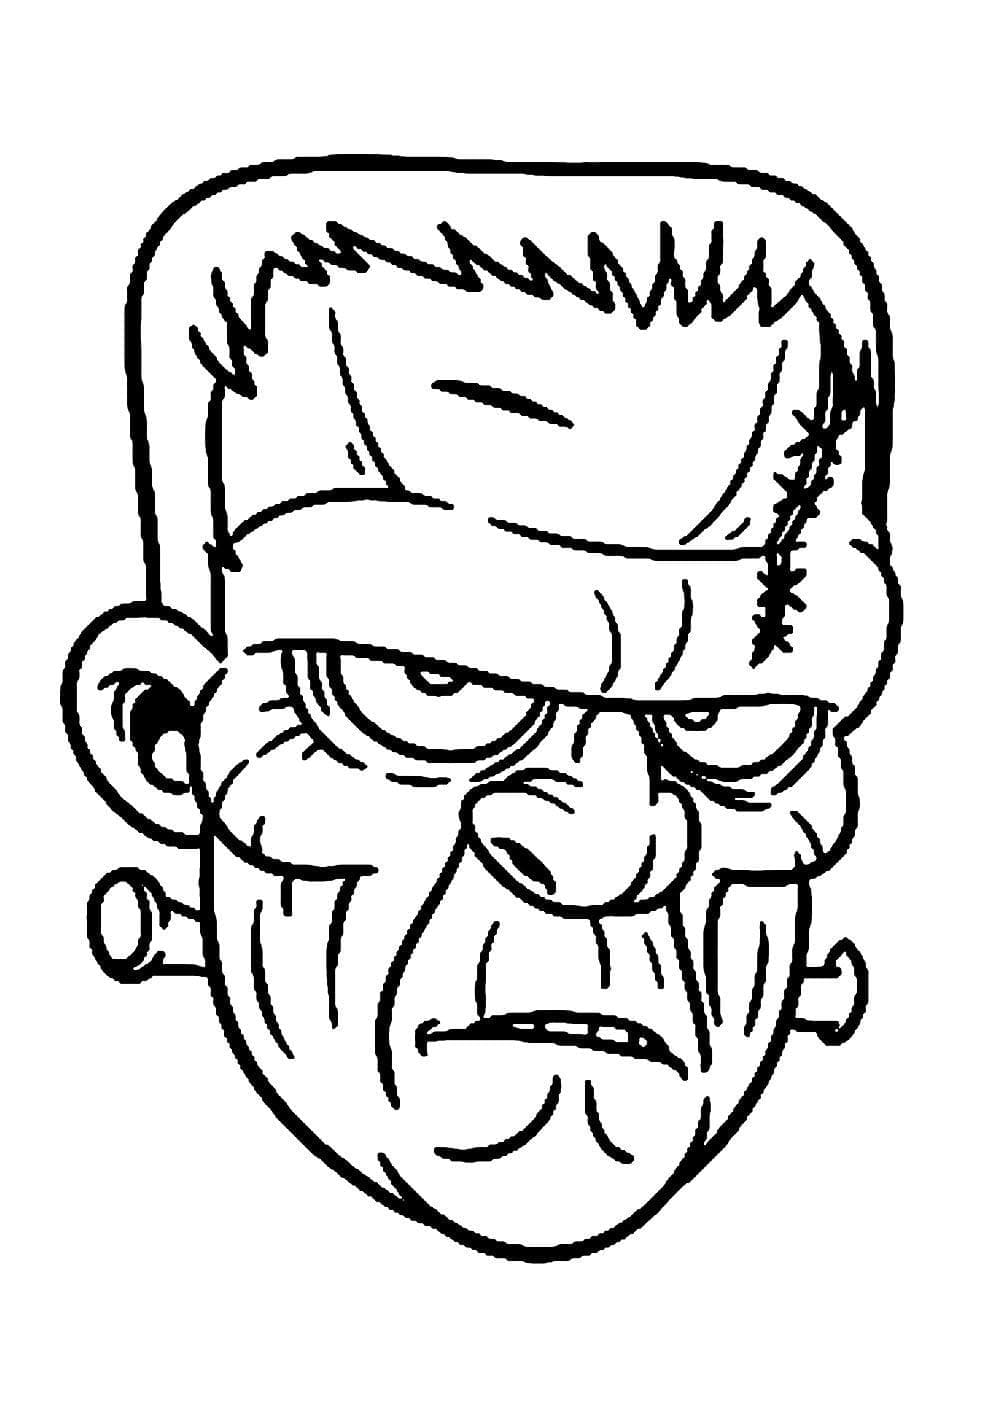 Frankenstein Face coloring page - Download, Print or Color Online for Free